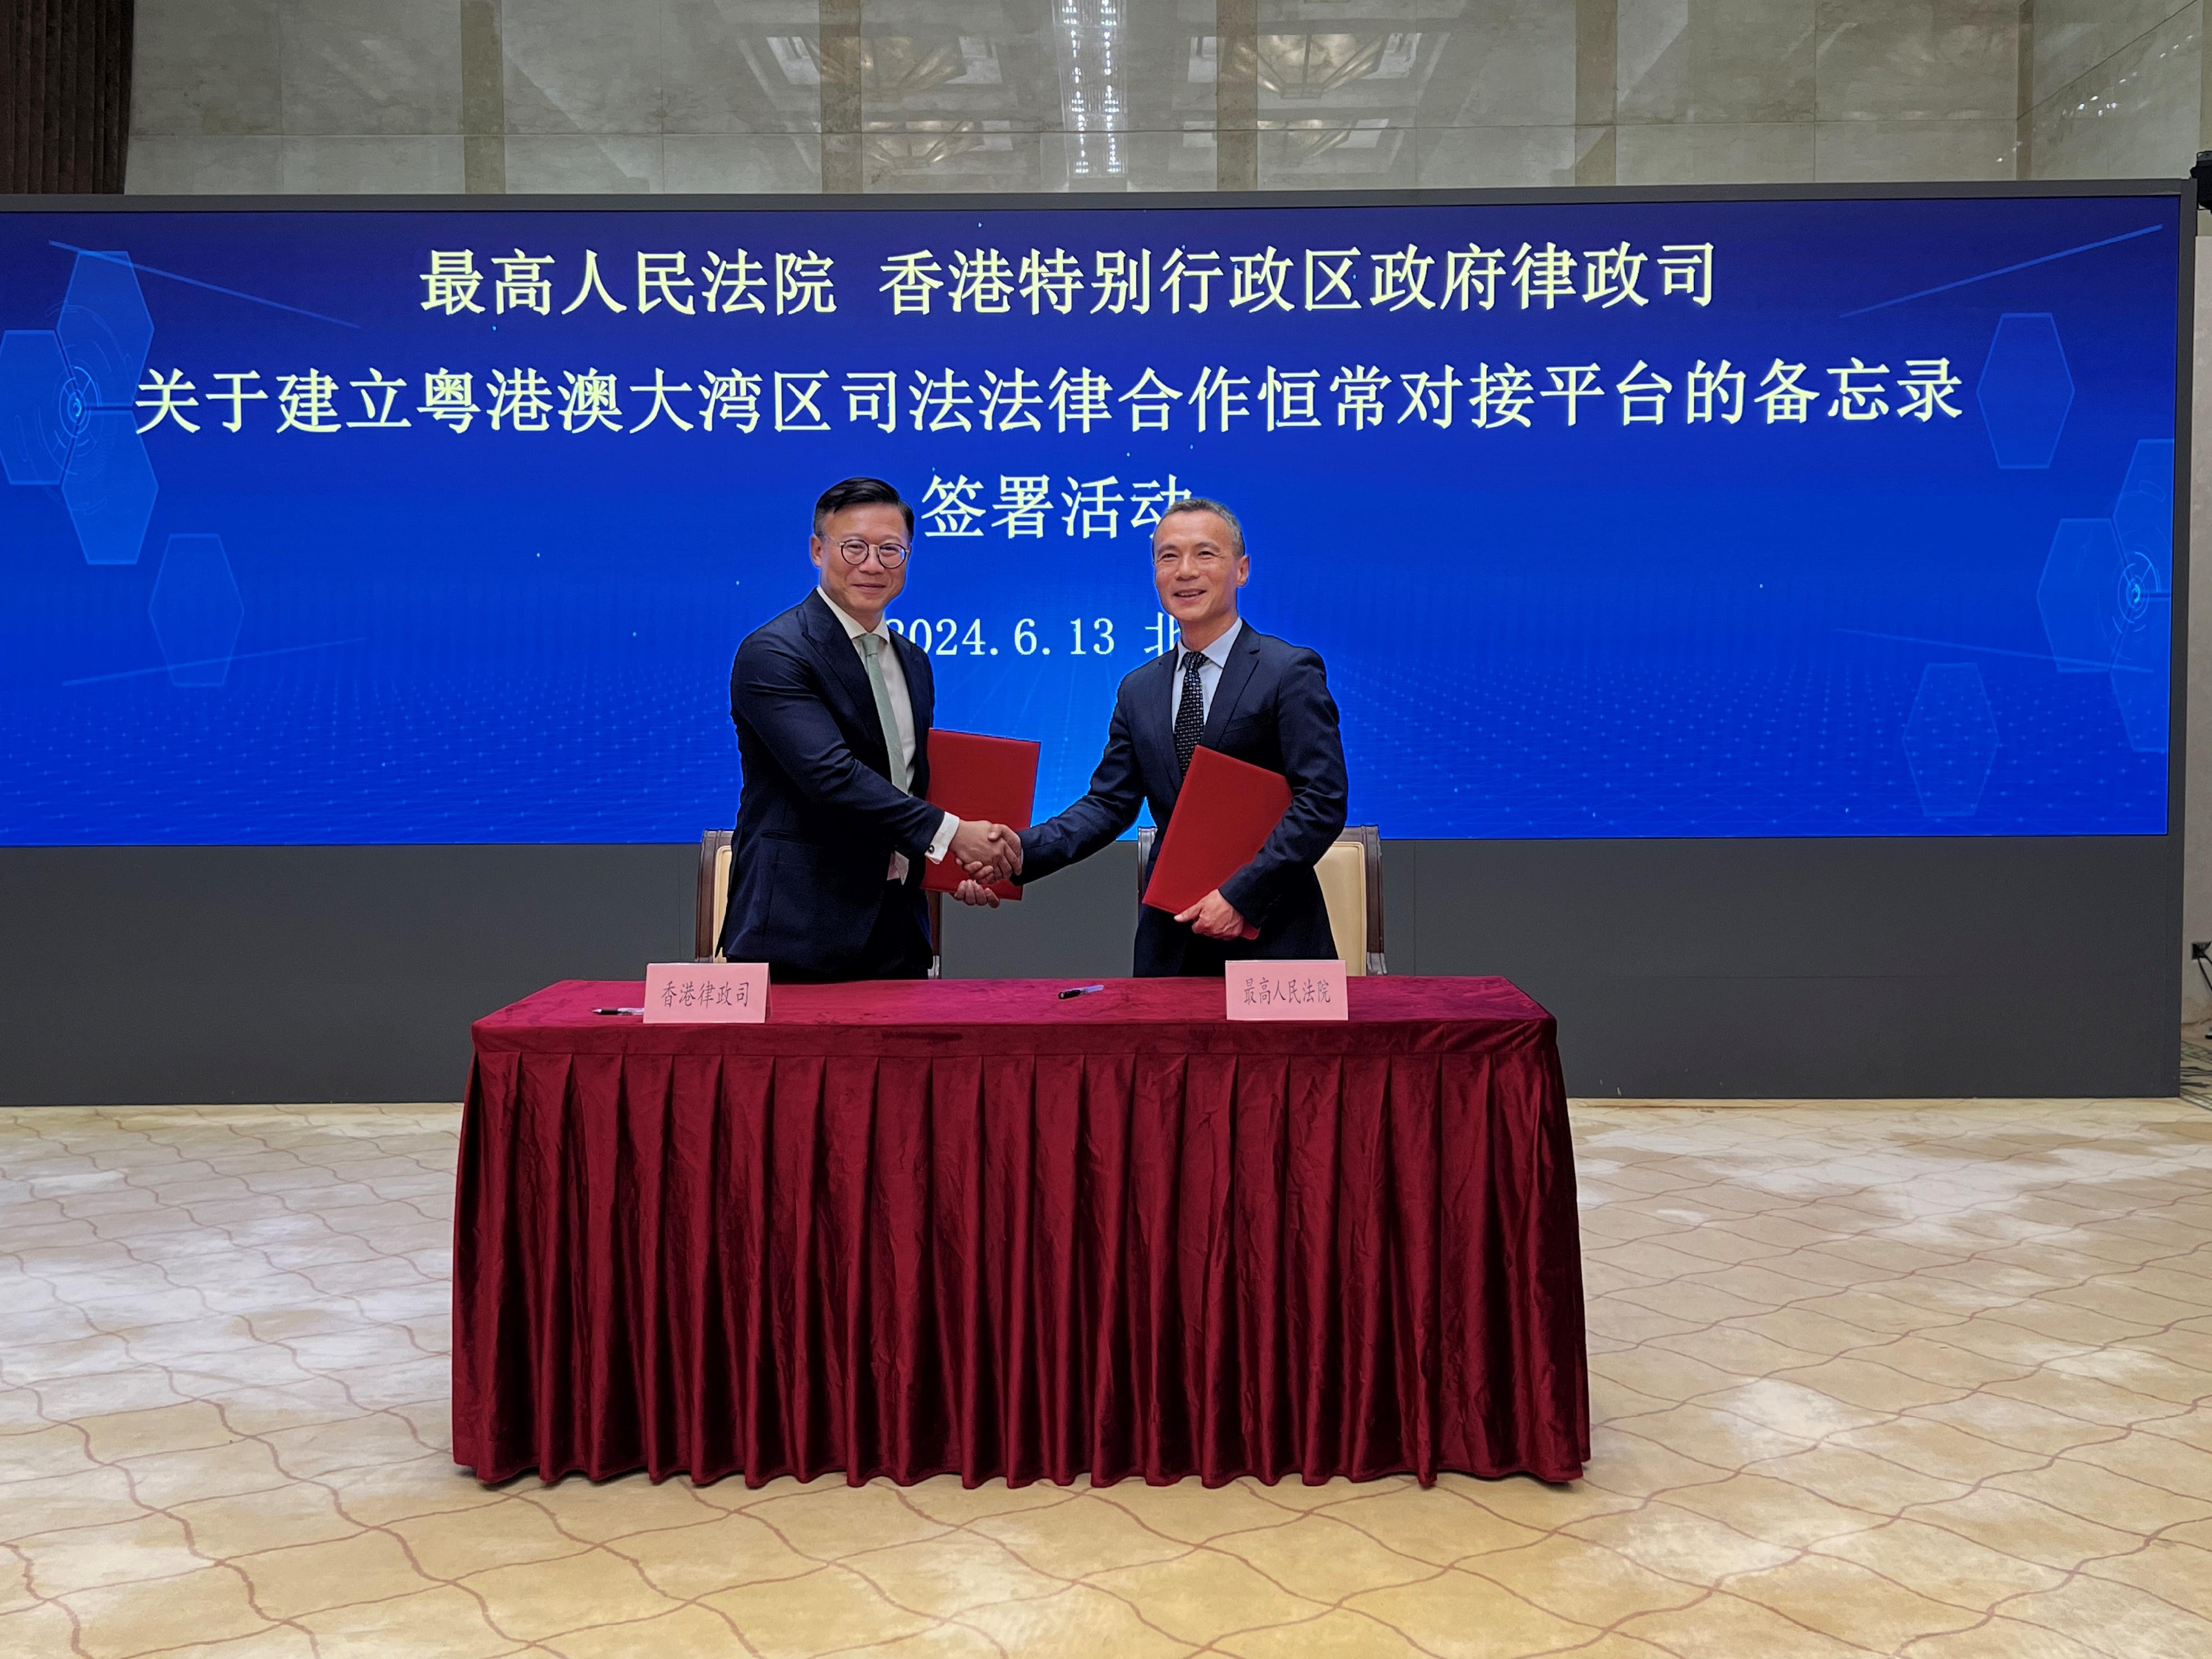 The Deputy Secretary for Justice, Mr Cheung Kwok-kwan (left), and the Director General of the Research Office of the Supreme People's Court, Mr Zhou Jiahai (right), on June 13 in Beijing sign a memorandum of understanding on establishing a standing interface platform on judicial and legal co-operation in the Guangdong-Hong Kong-Macao Greater Bay Area. 

 